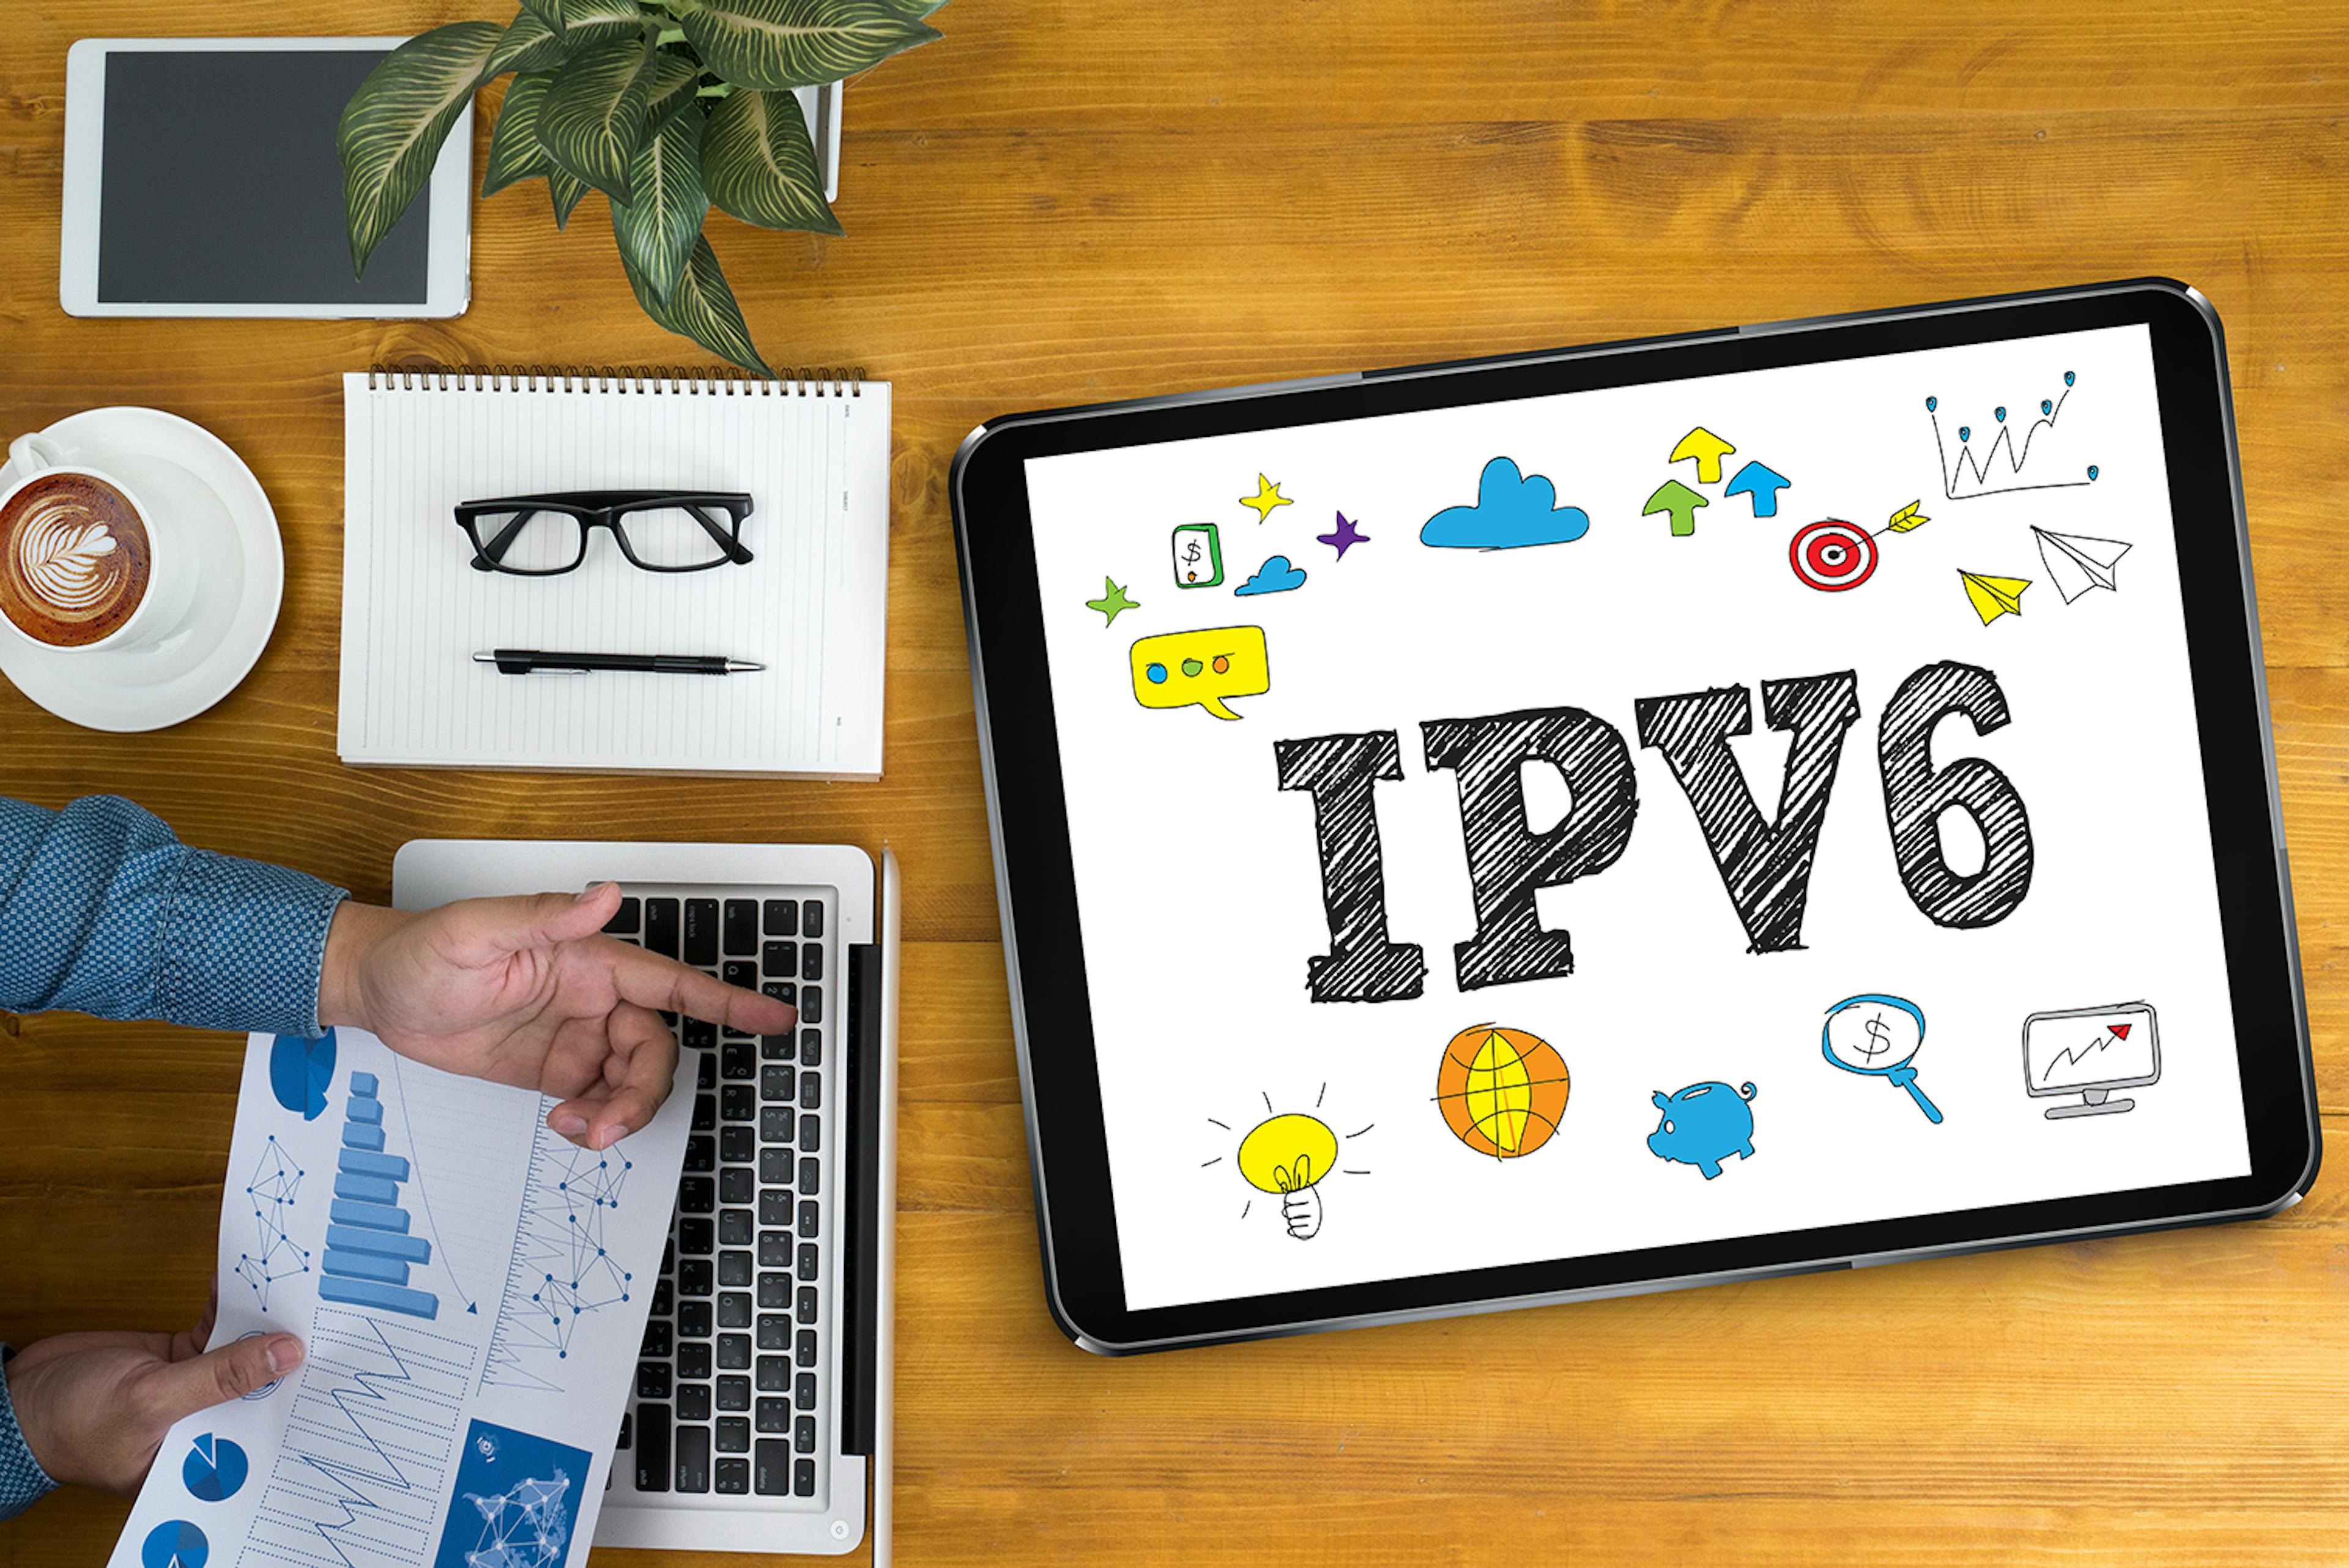 a stock photo showing IPv6 on a mobile device screen